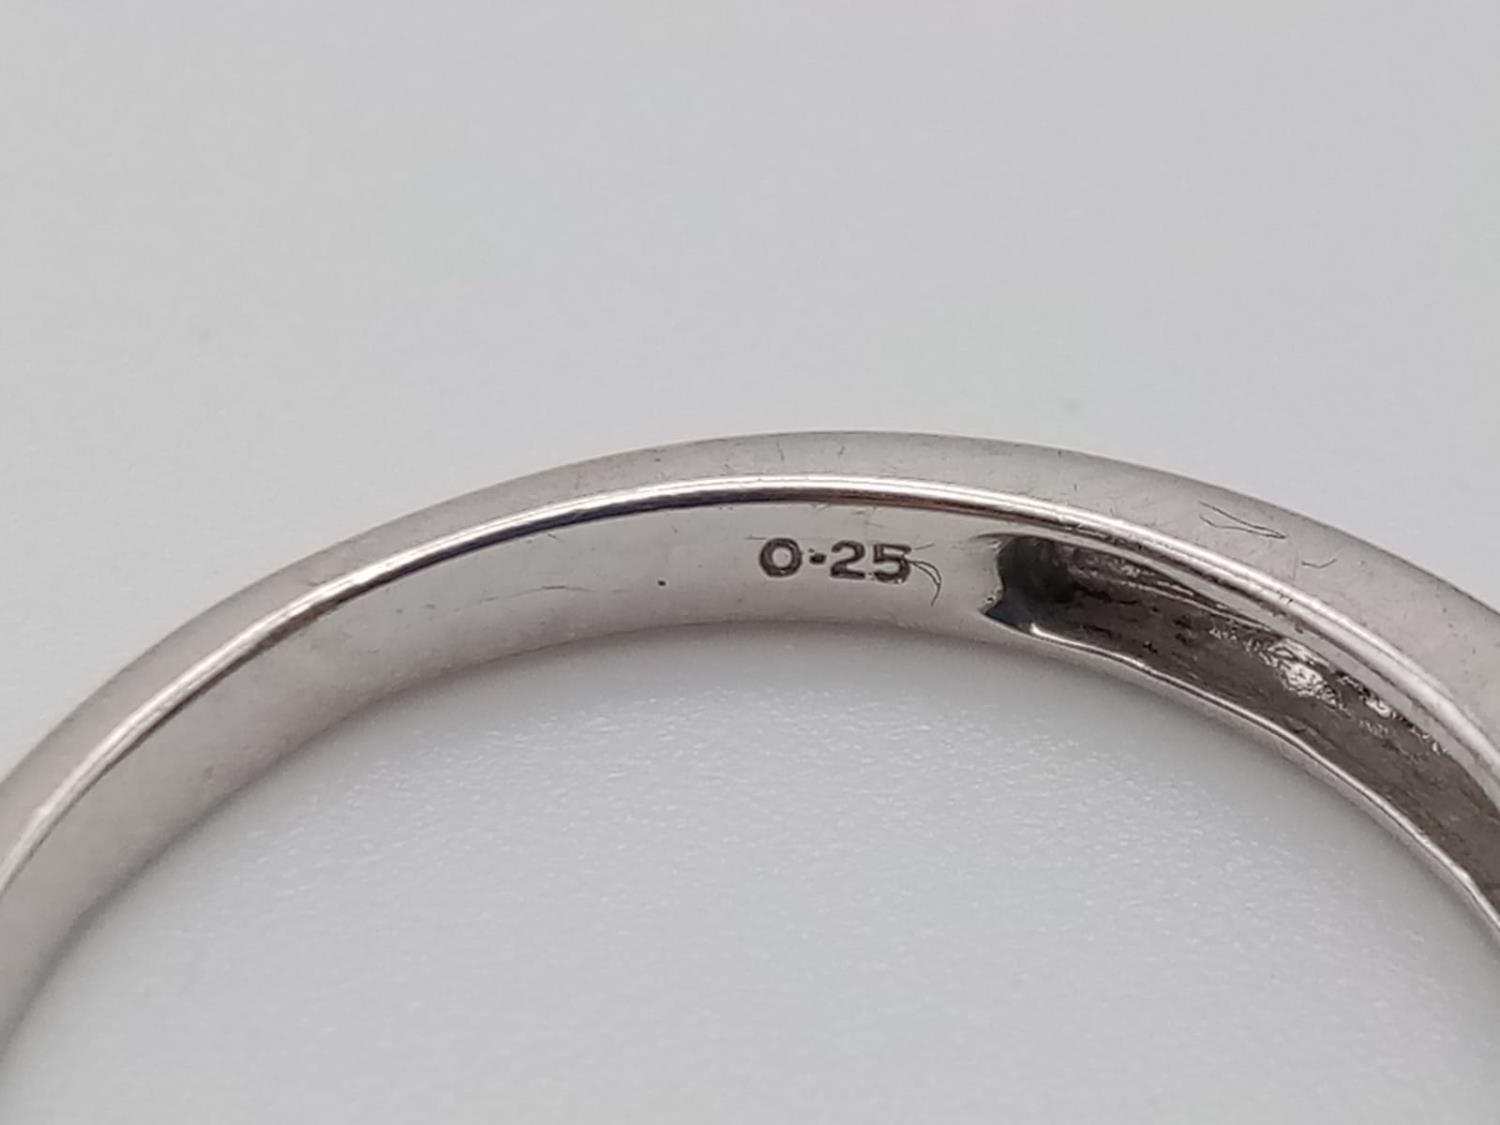 9k white gold half eternity ring, 2.4g weight and approx 0.25ct diamonds - Image 4 of 5